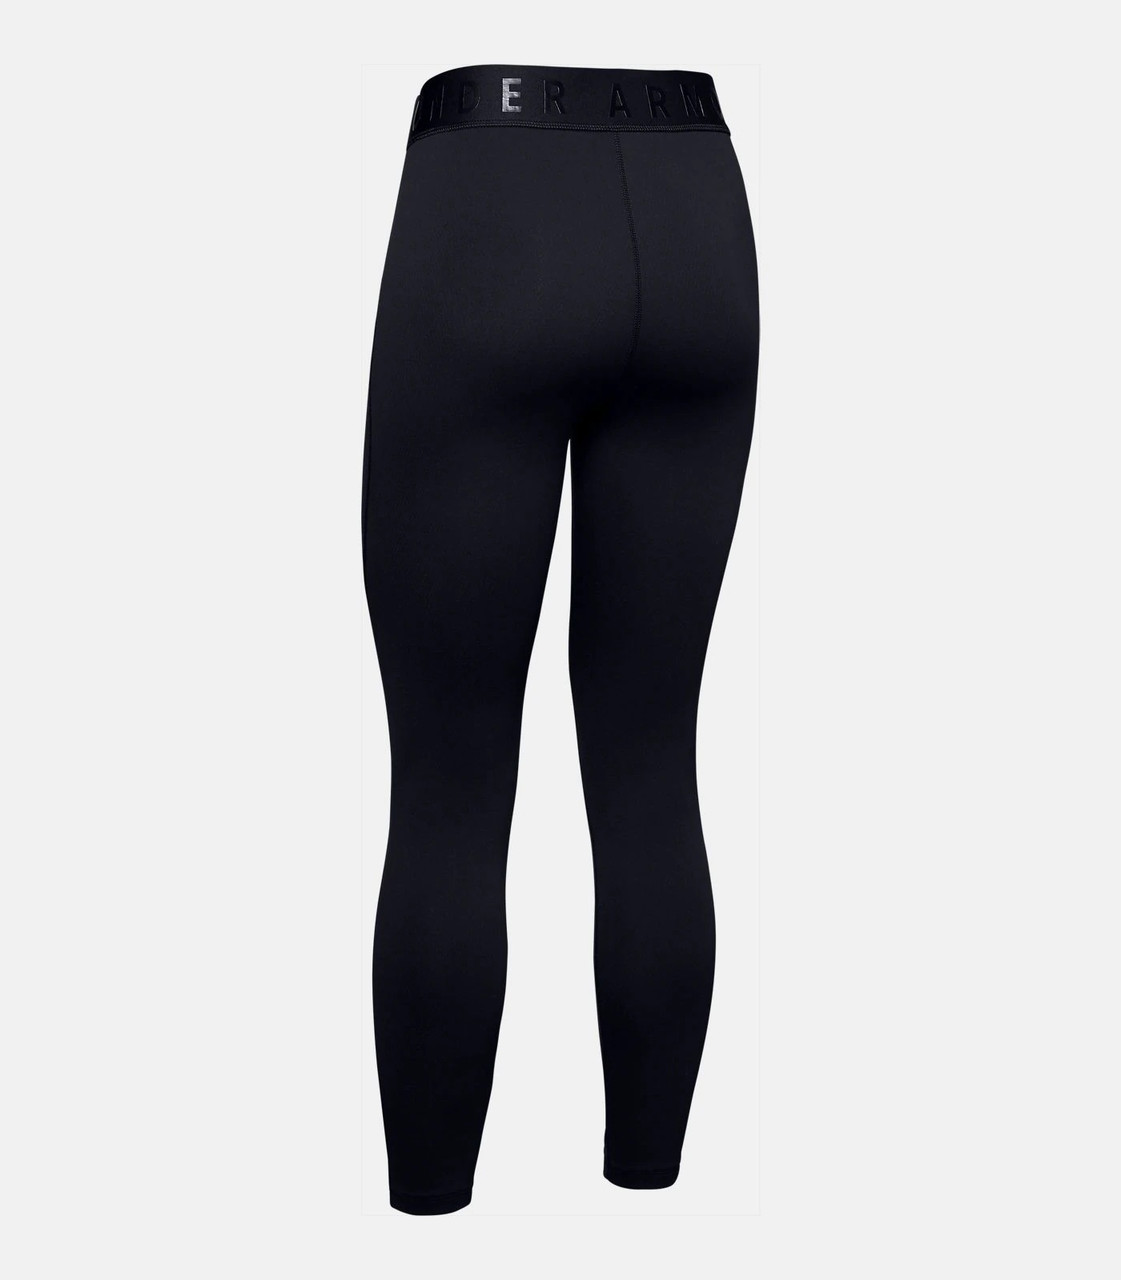 Buy Under Armour Women's ColdGear Base 2.0 Crew by Under Armour